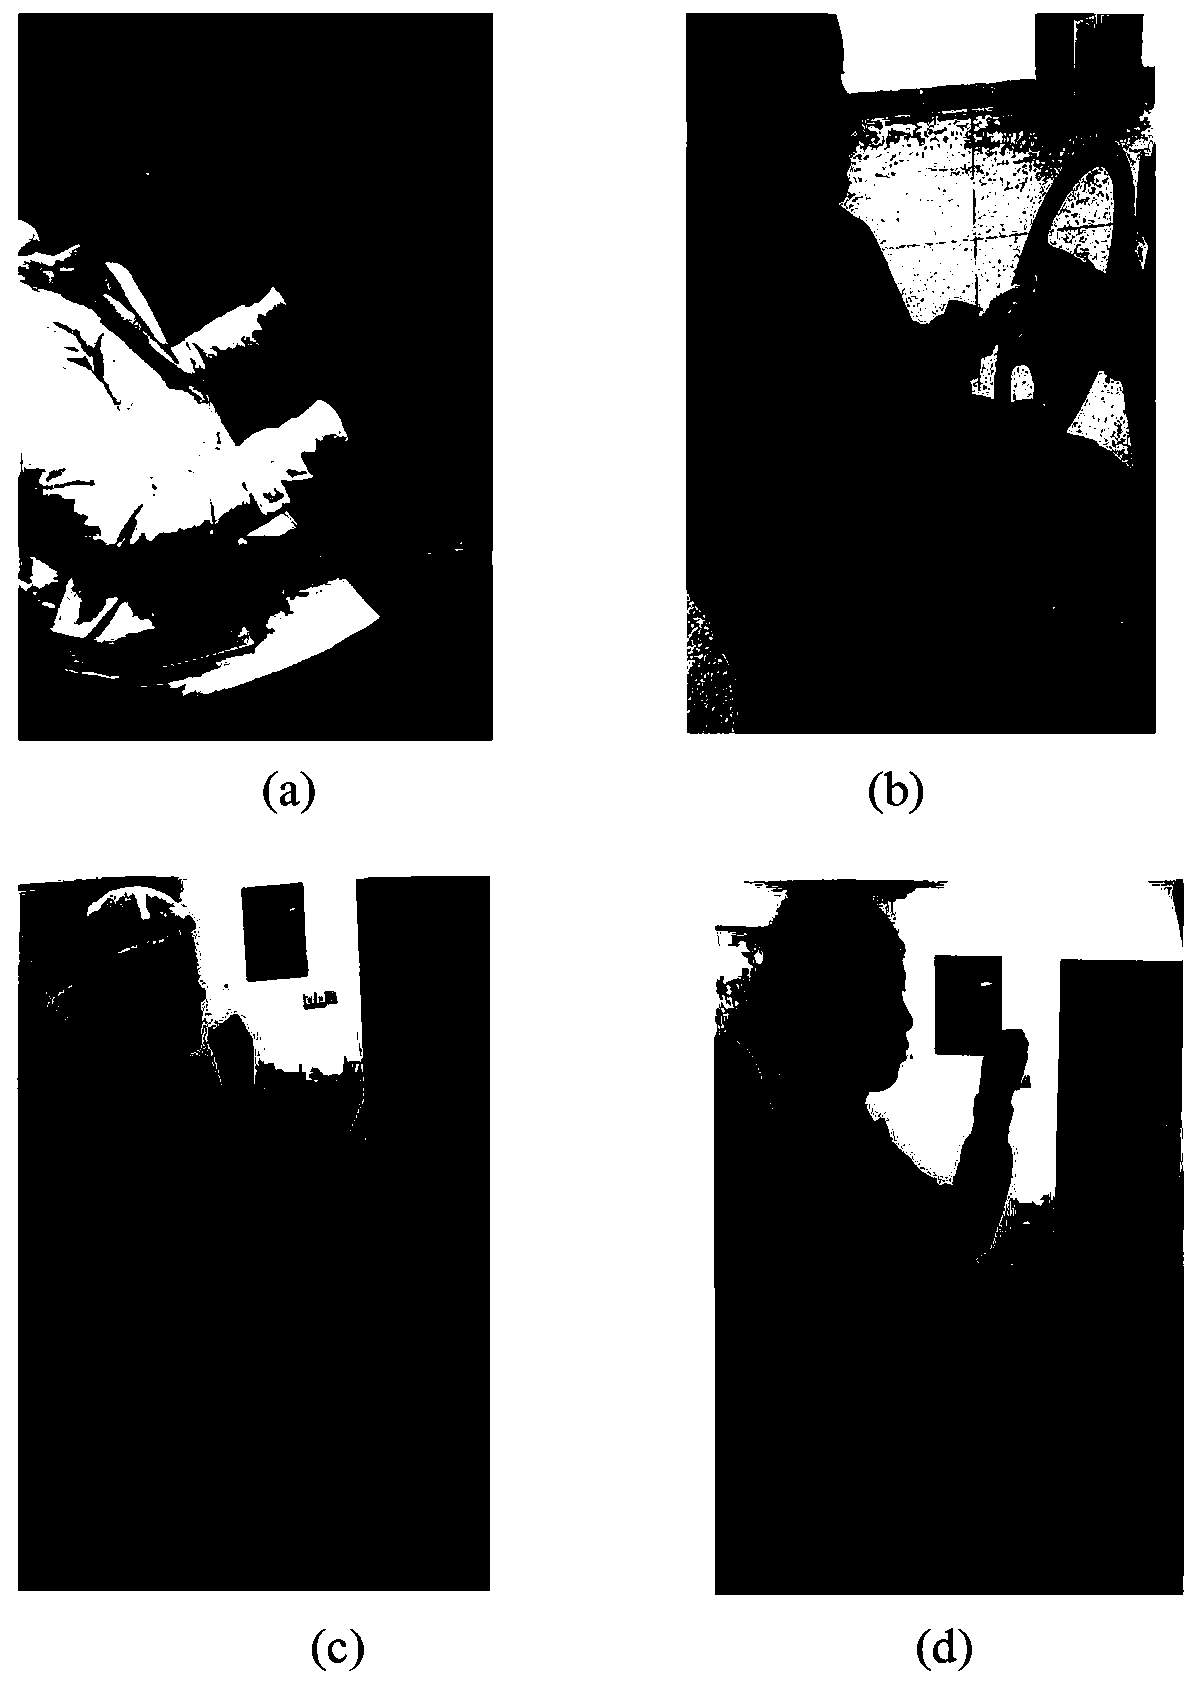 Driver posture detection method based on video and skin color area distance